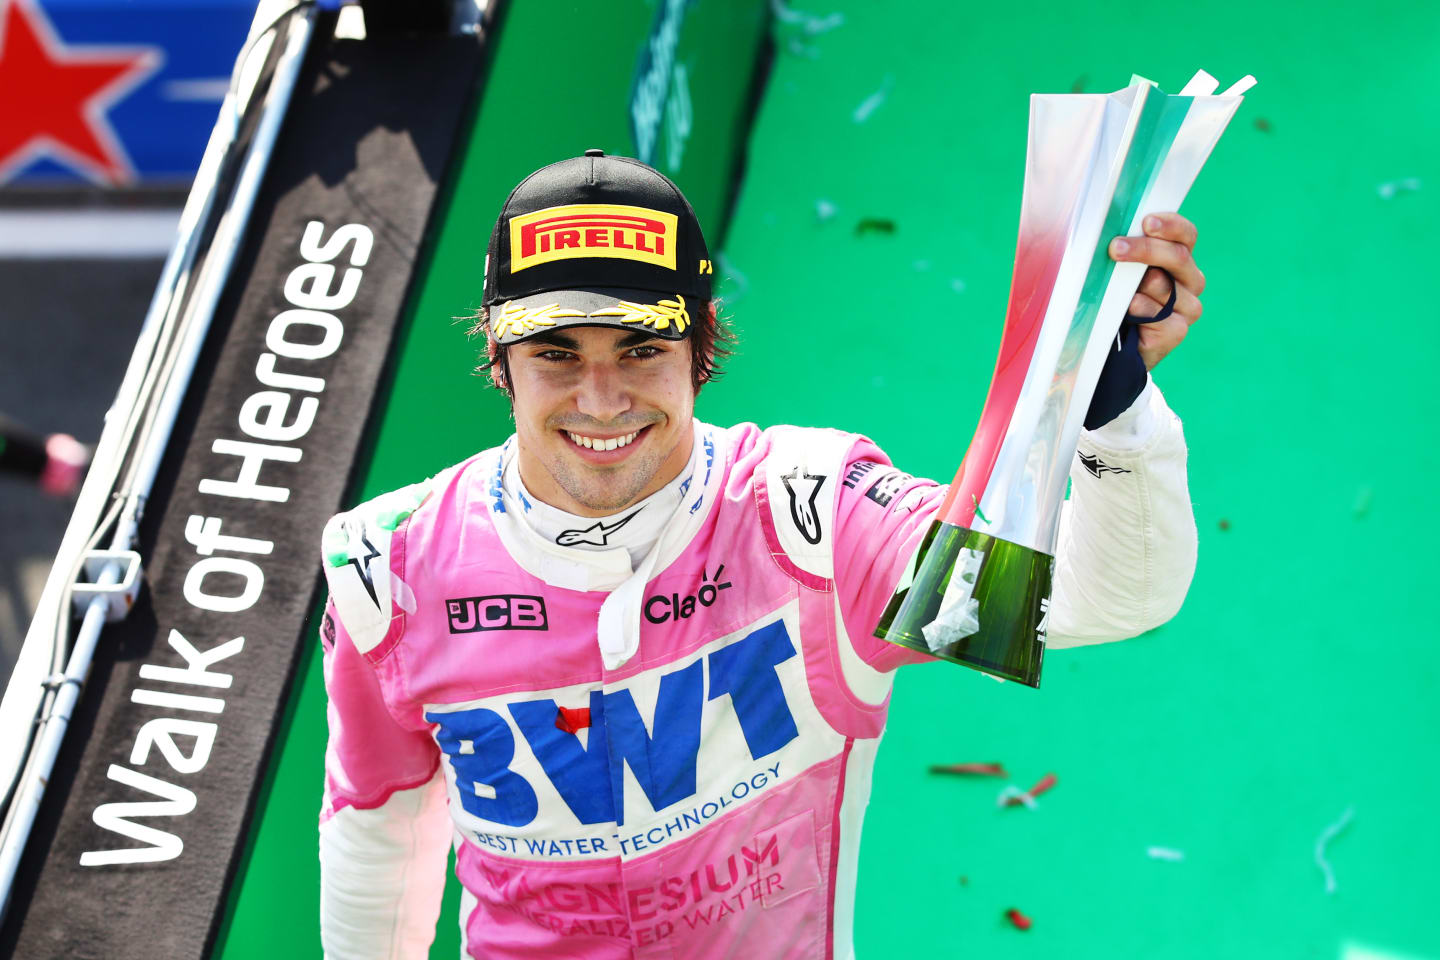 MONZA, ITALY - SEPTEMBER 06: Third placed Lance Stroll of Canada and Racing Point celebrates on the podium during the F1 Grand Prix of Italy at Autodromo di Monza on September 06, 2020 in Monza, Italy. (Photo by Mark Thompson/Getty Images)